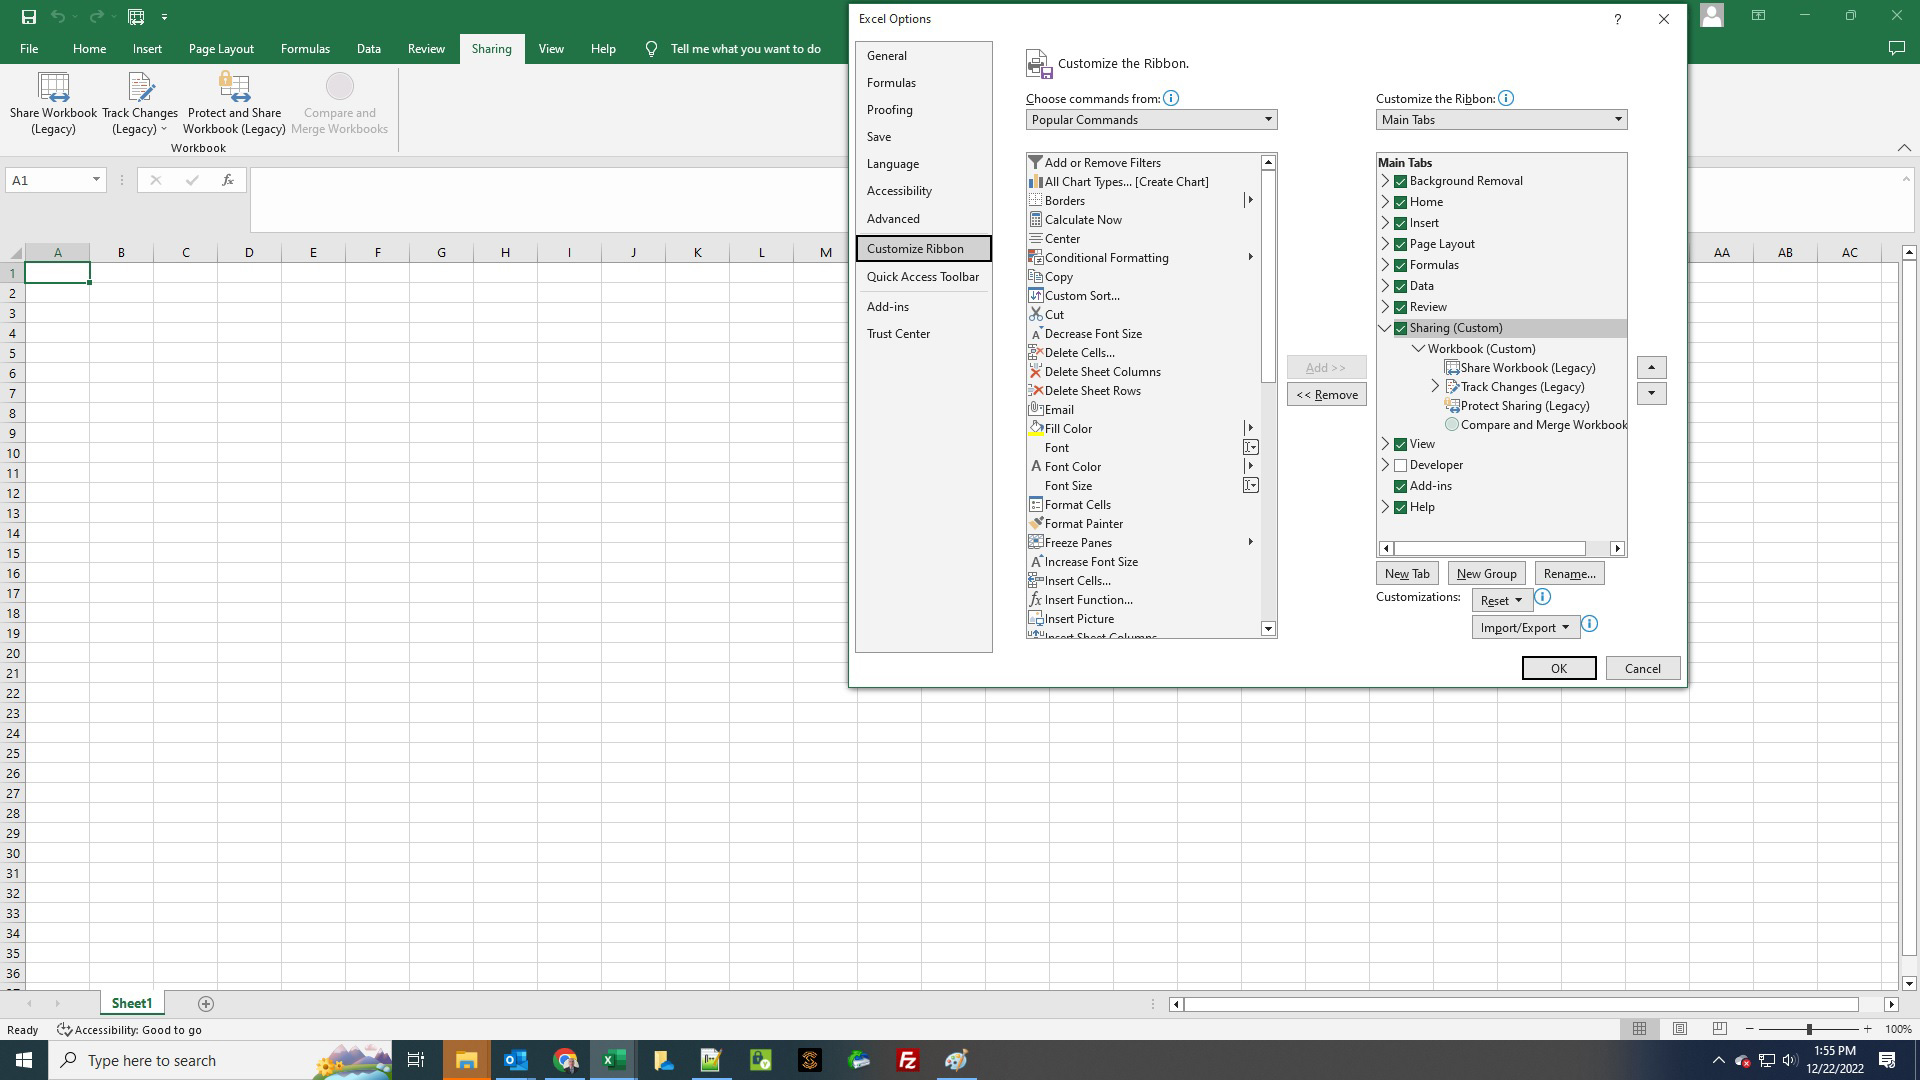 Excel Spreadsheet Quick Access Sharing Tab and options created